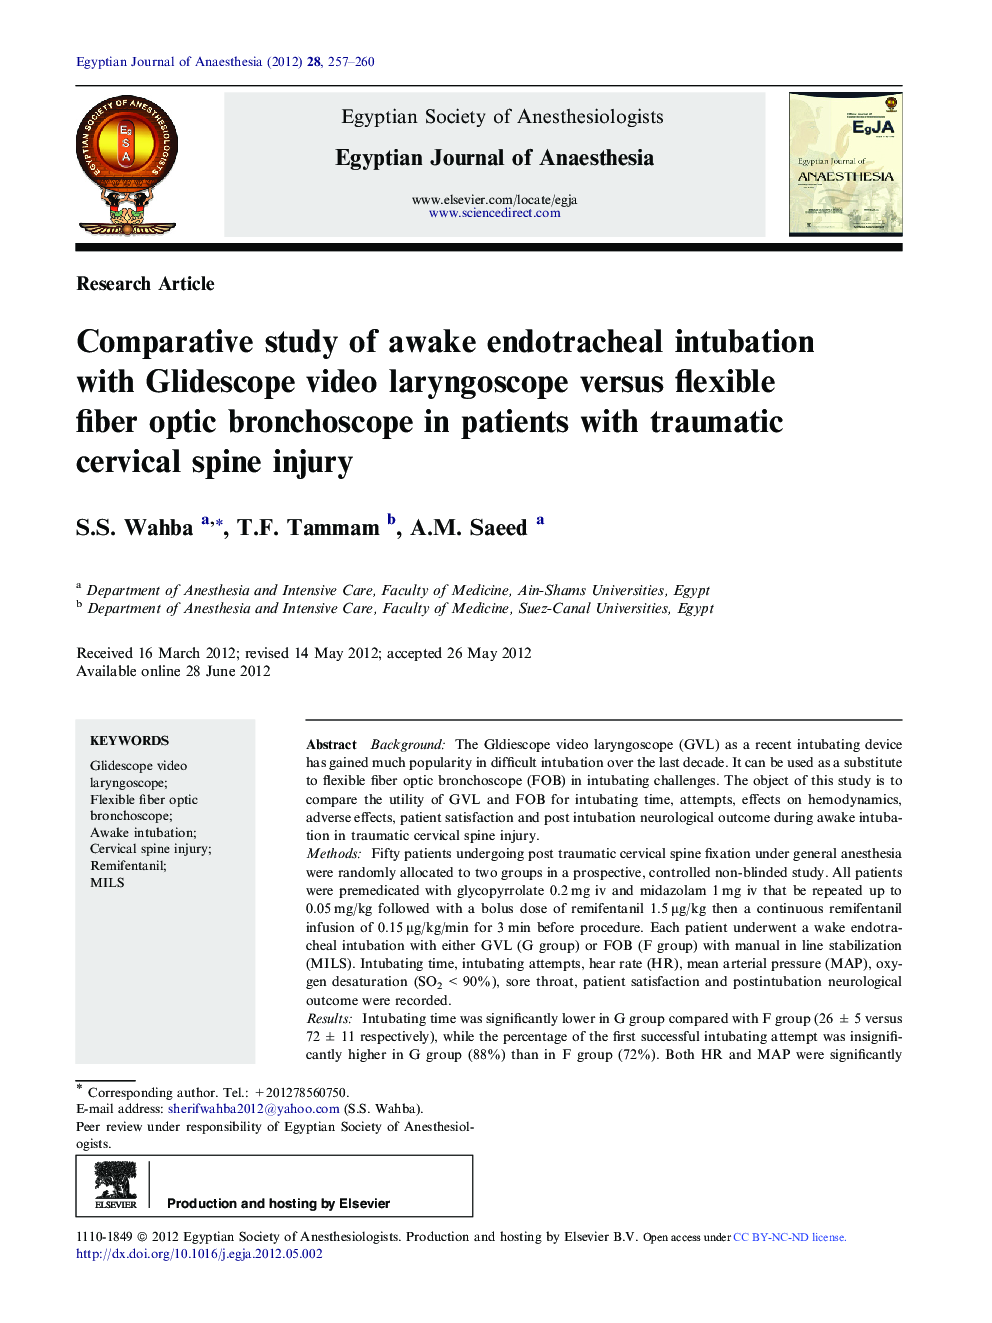 Comparative study of awake endotracheal intubation with Glidescope video laryngoscope versus flexible fiber optic bronchoscope in patients with traumatic cervical spine injury 